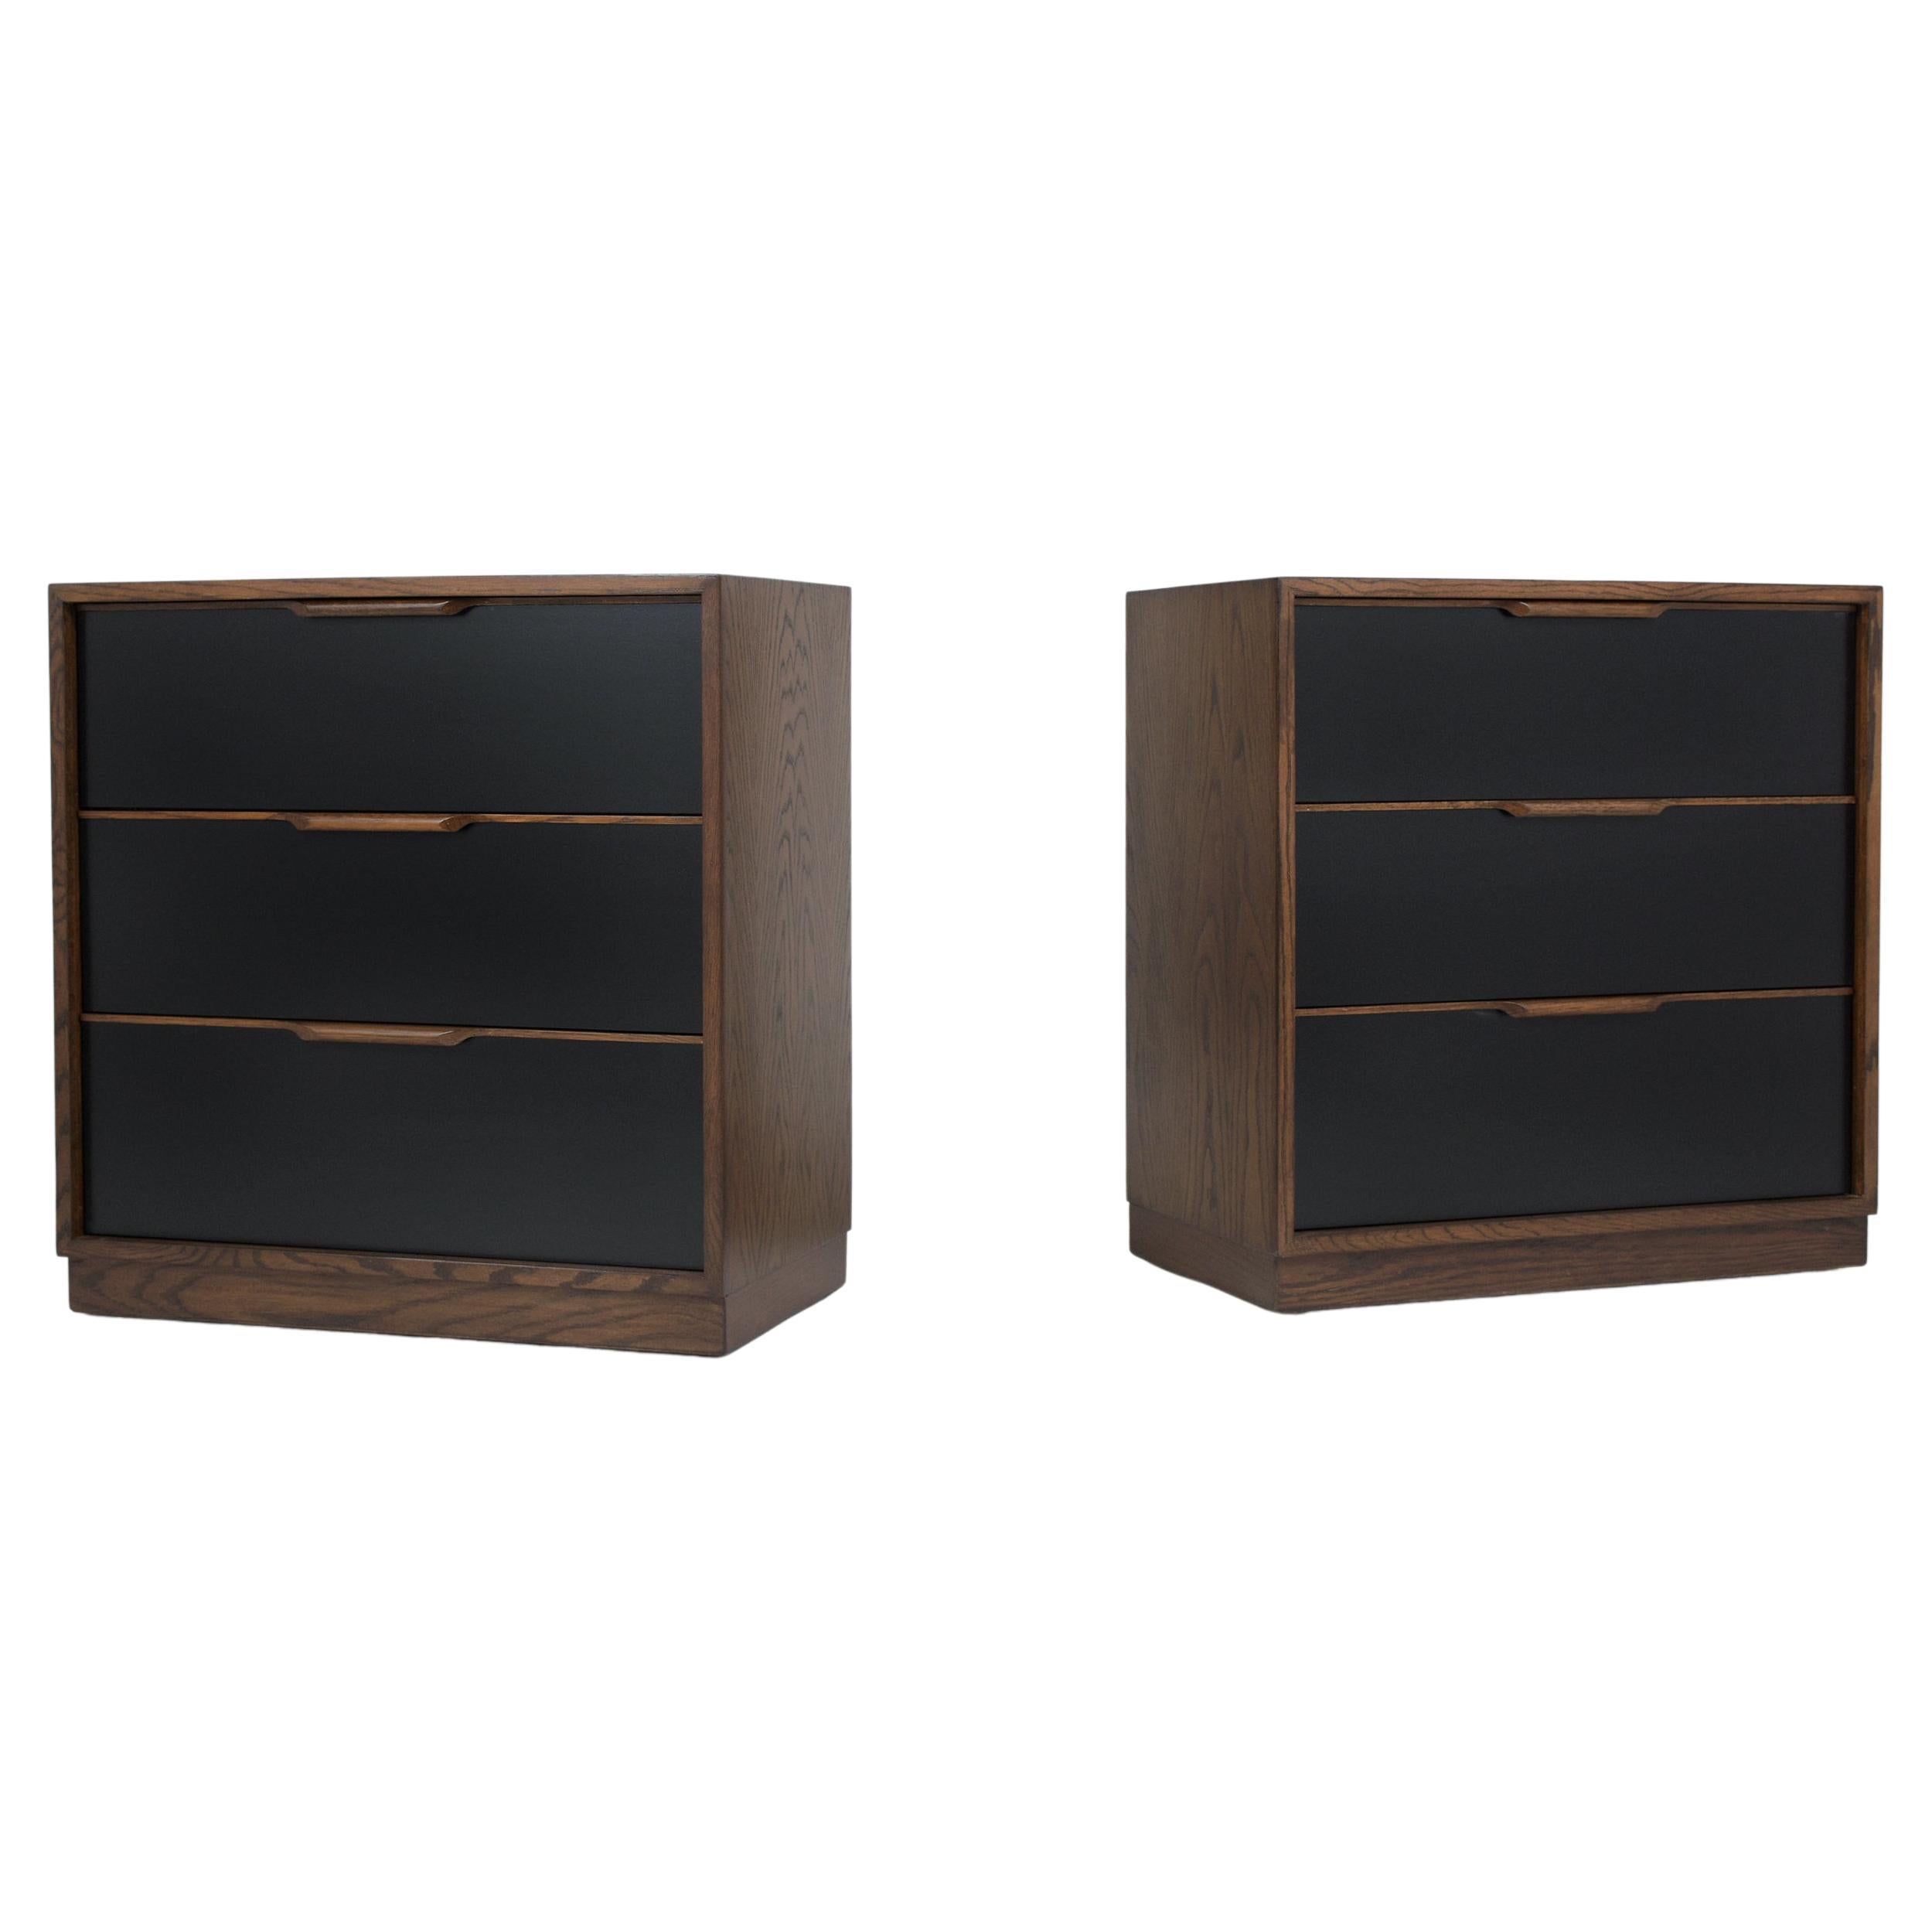 Introducing our exceptional pair of Mid-Century Danish Chests of Drawers, a testament to the timeless appeal of walnut craftsmanship. These bachelor dressers, hand-crafted from the finest walnut wood, have been fully restored to their original